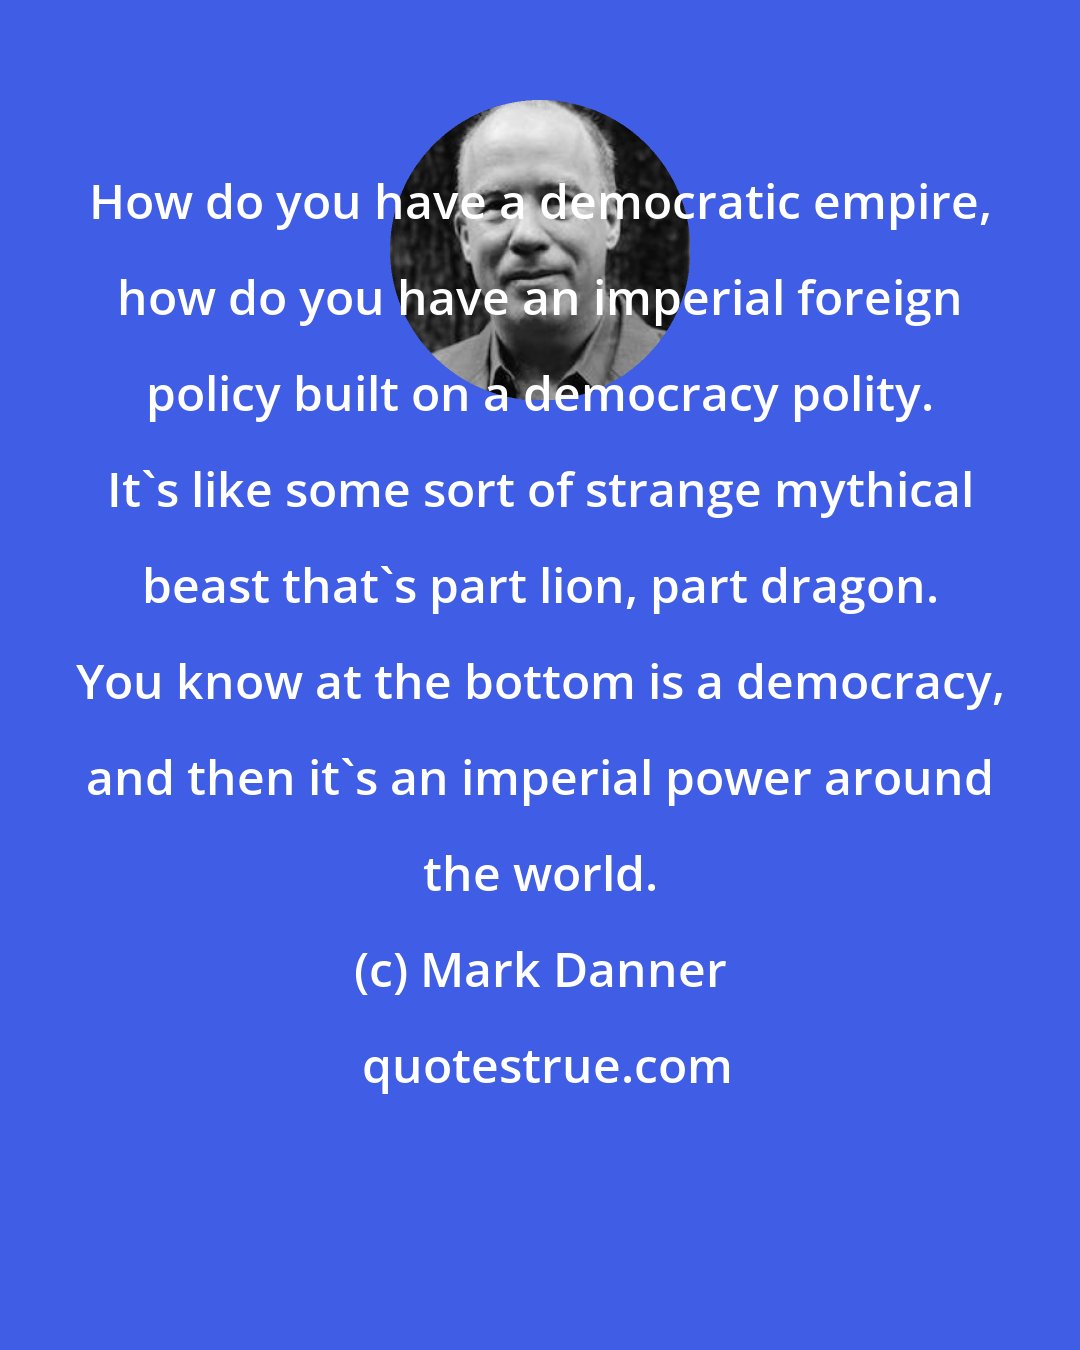 Mark Danner: How do you have a democratic empire, how do you have an imperial foreign policy built on a democracy polity. It's like some sort of strange mythical beast that's part lion, part dragon. You know at the bottom is a democracy, and then it's an imperial power around the world.